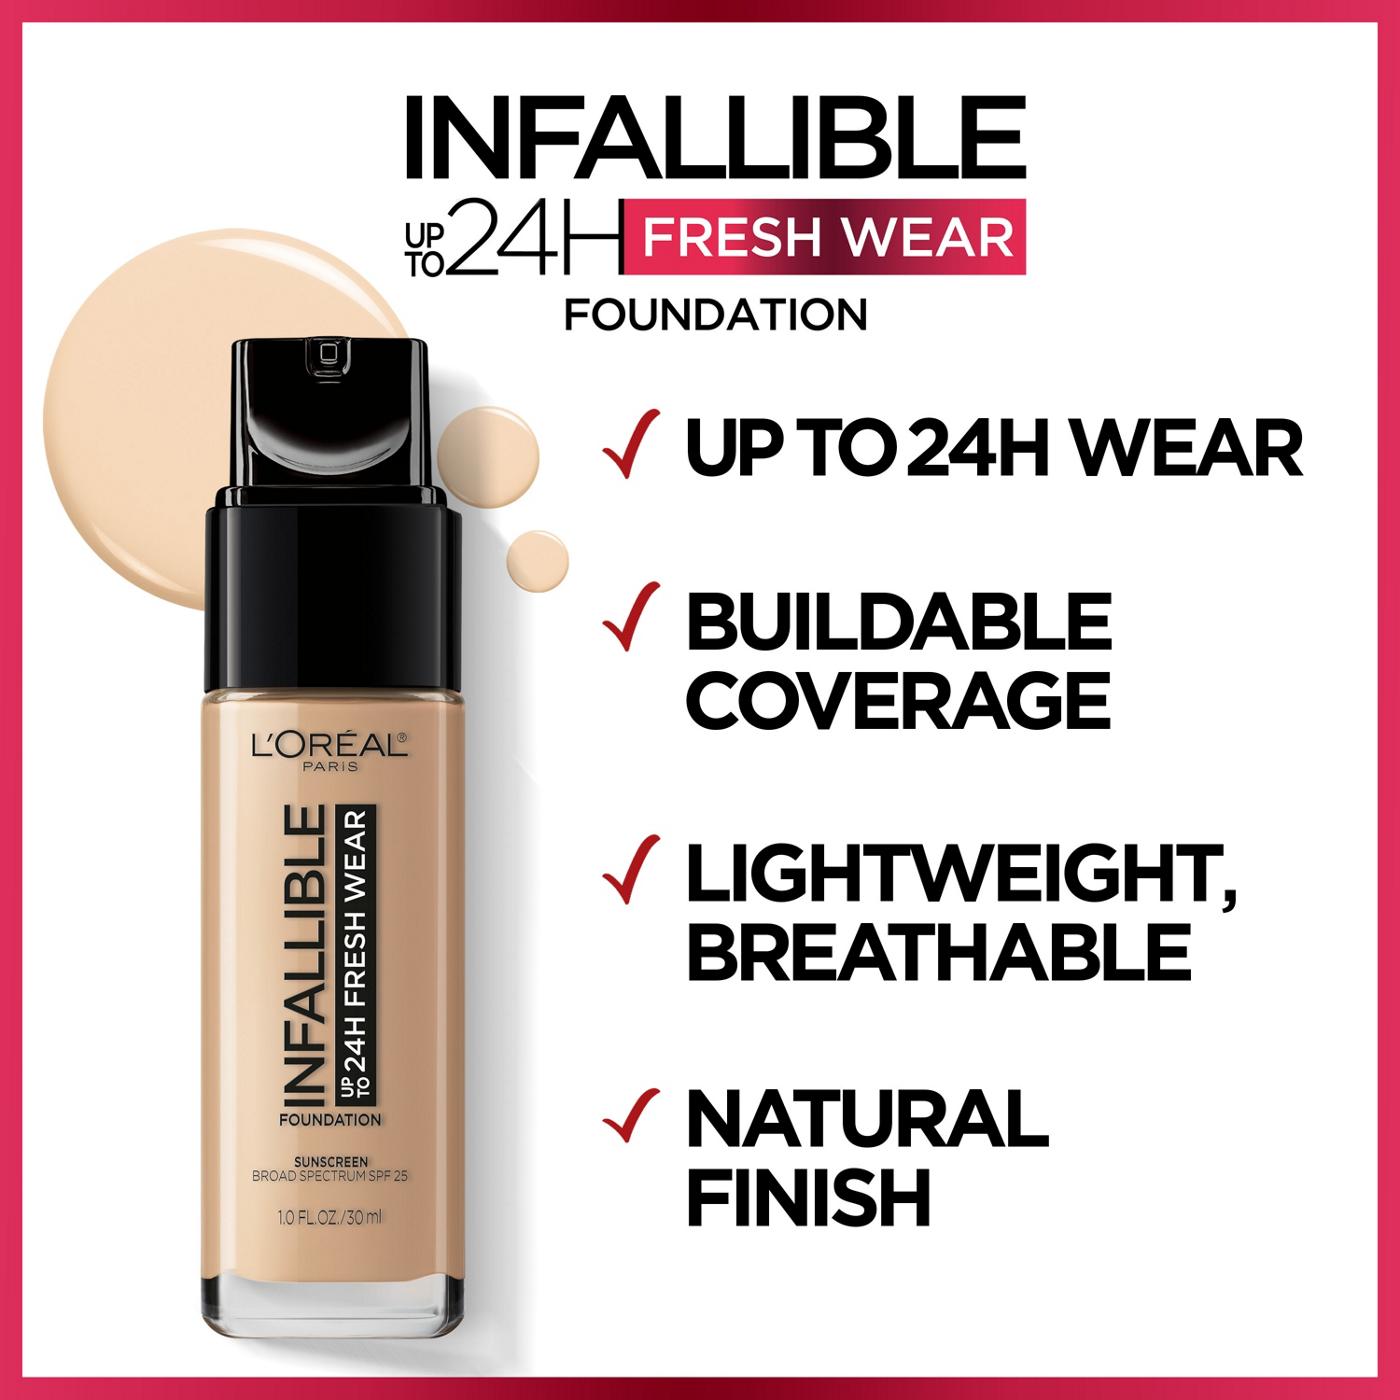 L'Oréal Paris Infallible Up to 24 Hour Fresh Wear Foundation - Lightweight Warm Almond; image 2 of 8